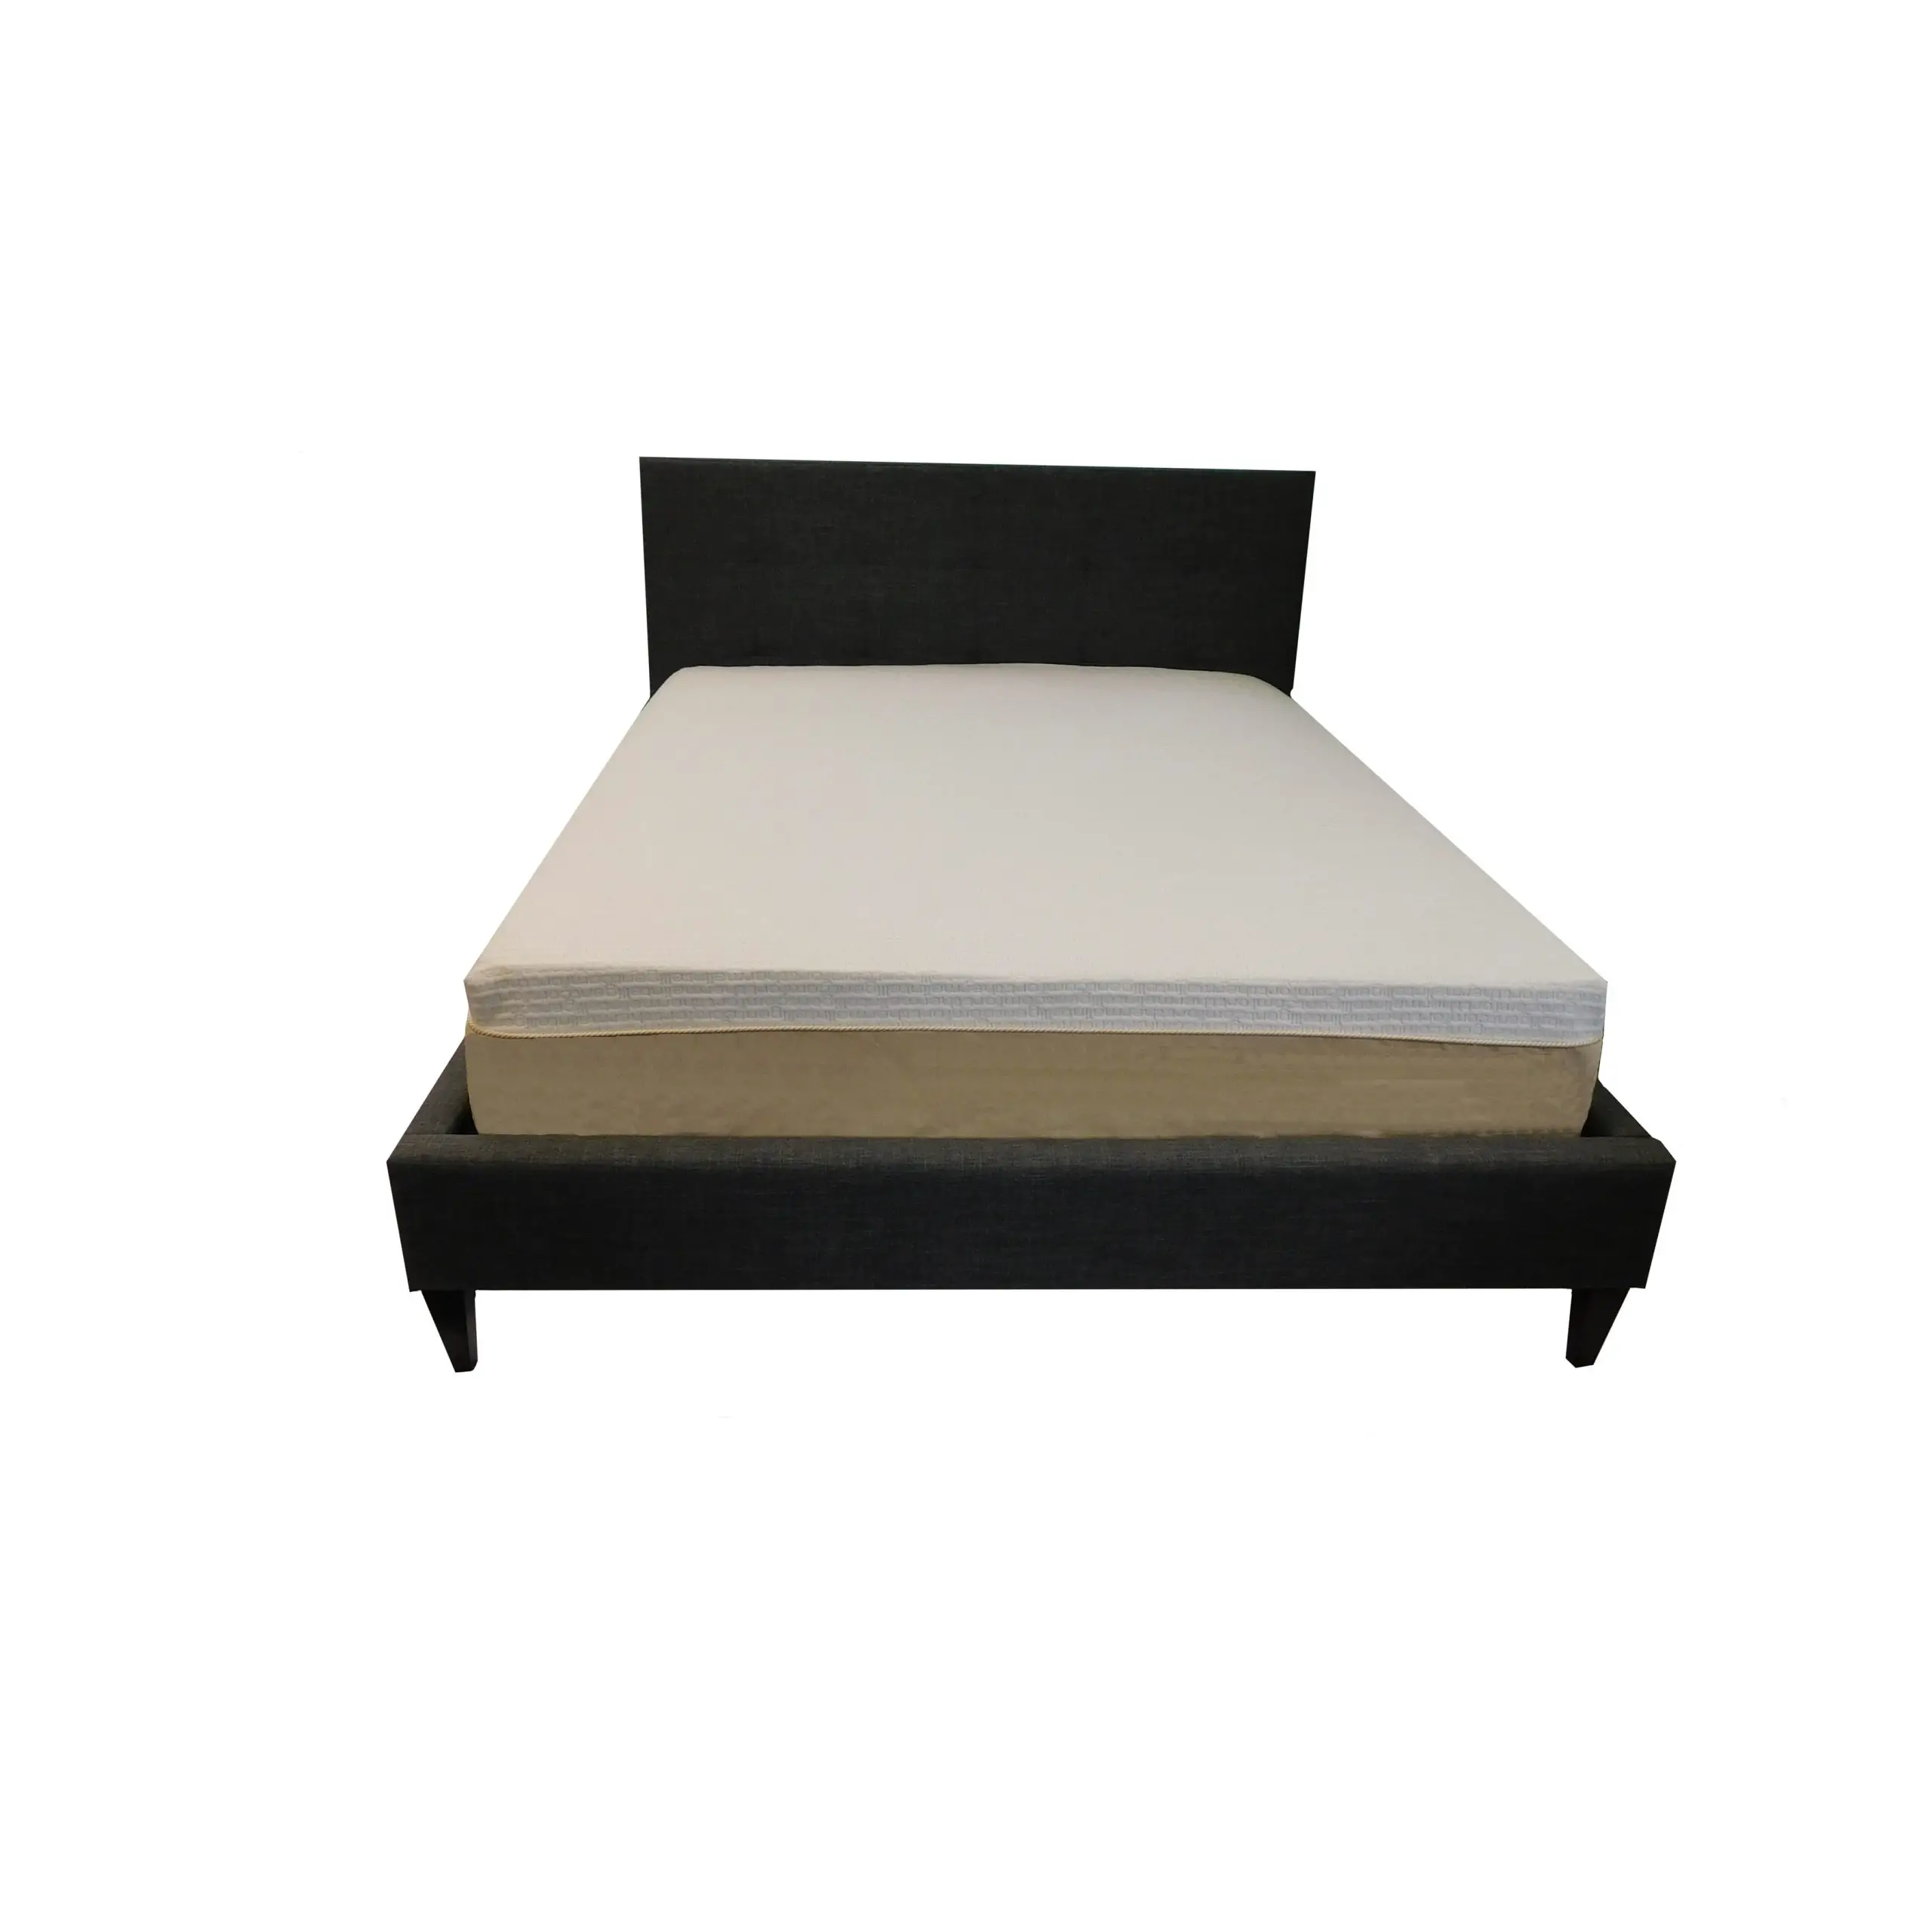 Plush Mattress Meaning / What Is A Plush Mattress Living Spaces / The ...